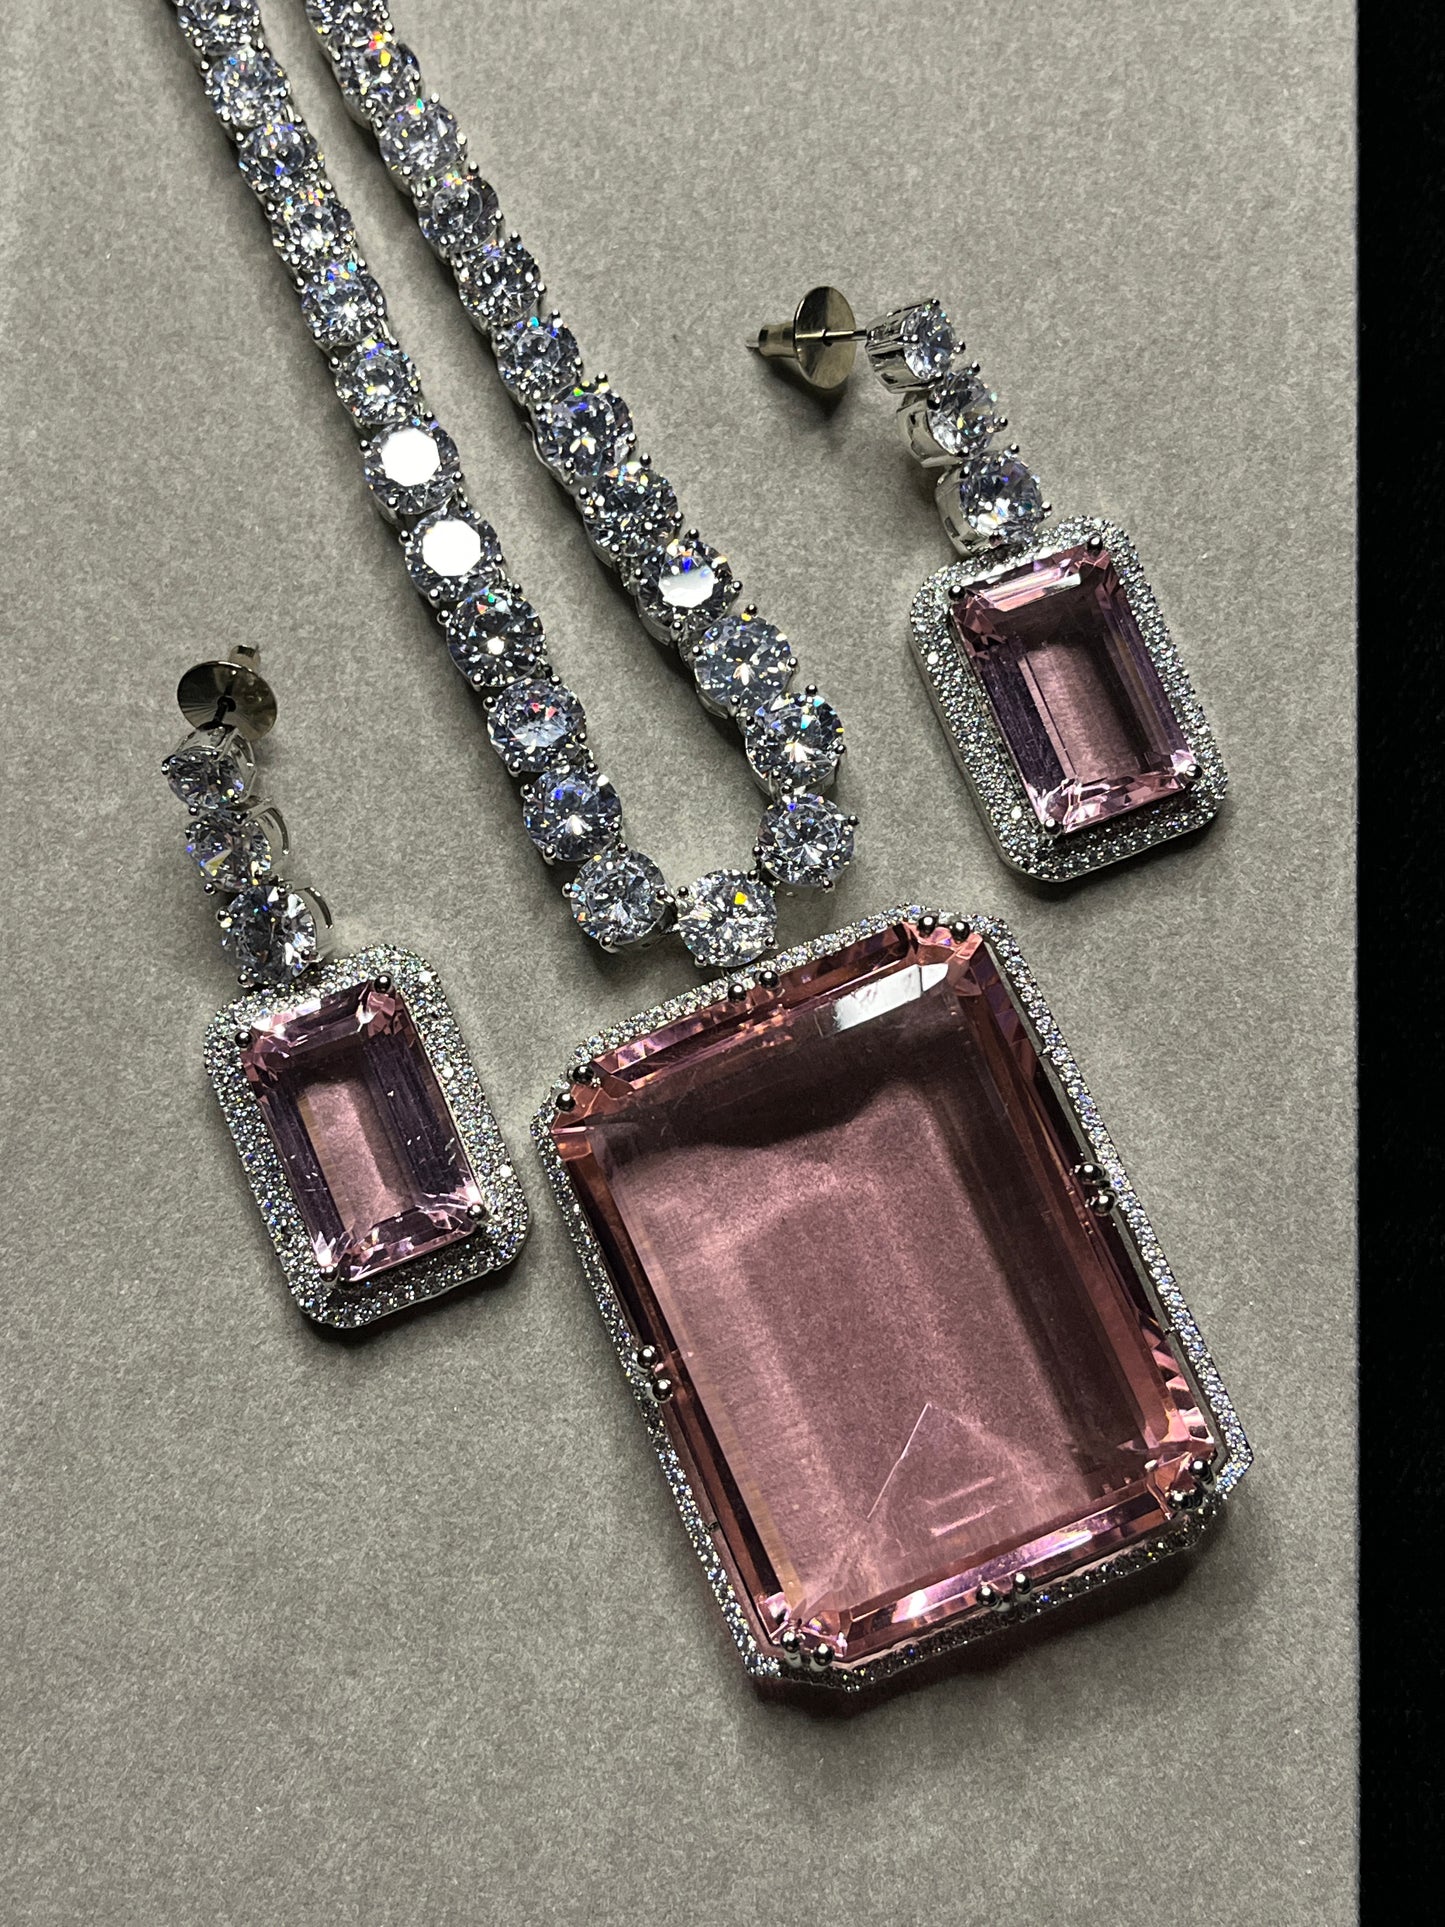 SS Classy Pink Radiance: Sophisticated Gem Pendant Necklace with Earrings.